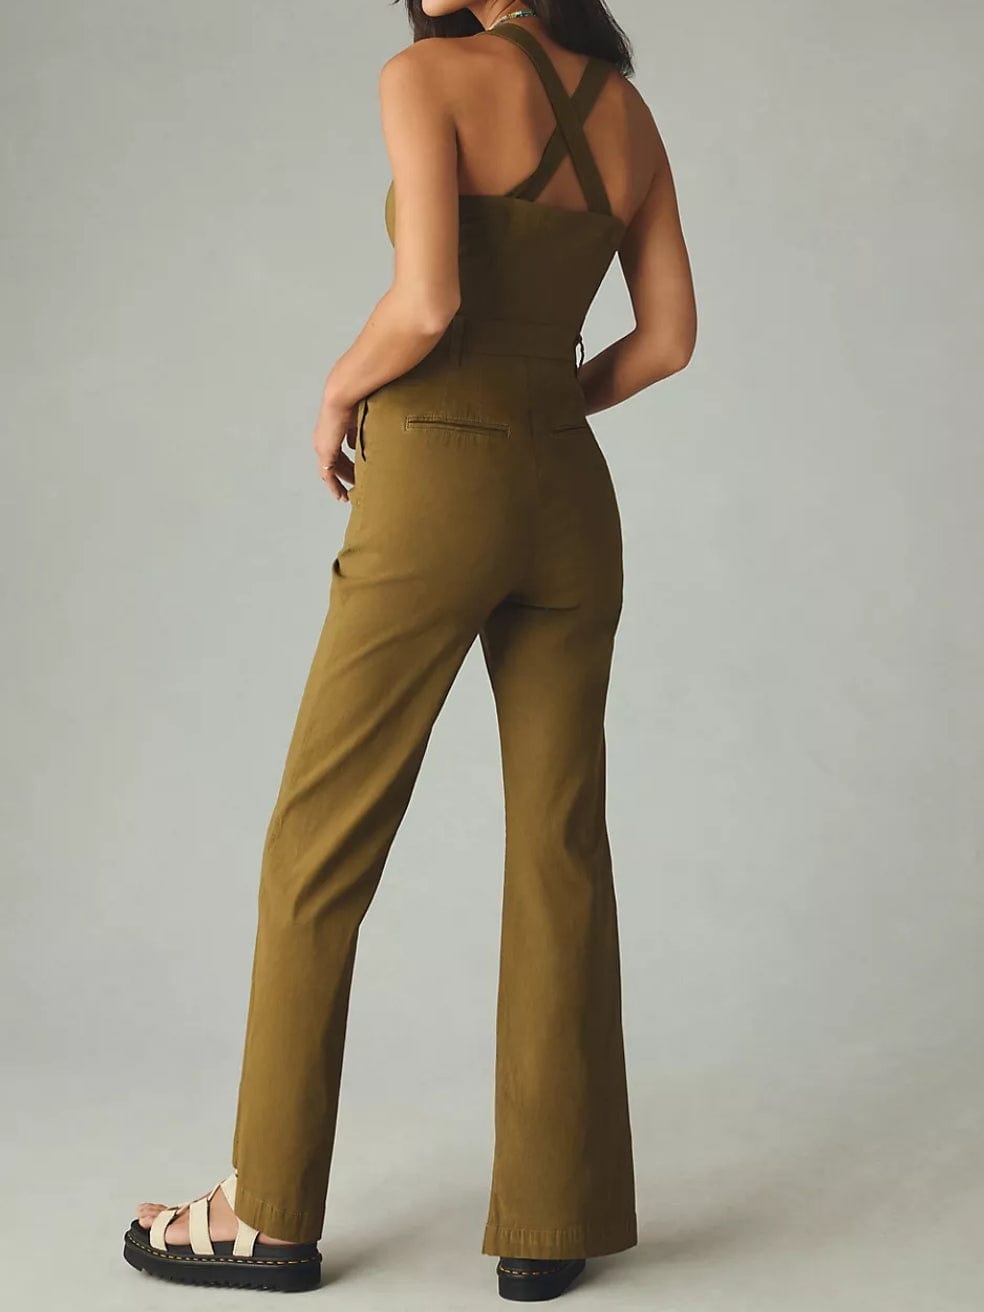 The Naomi Workwear Jumpsuit by Maeve in Olive